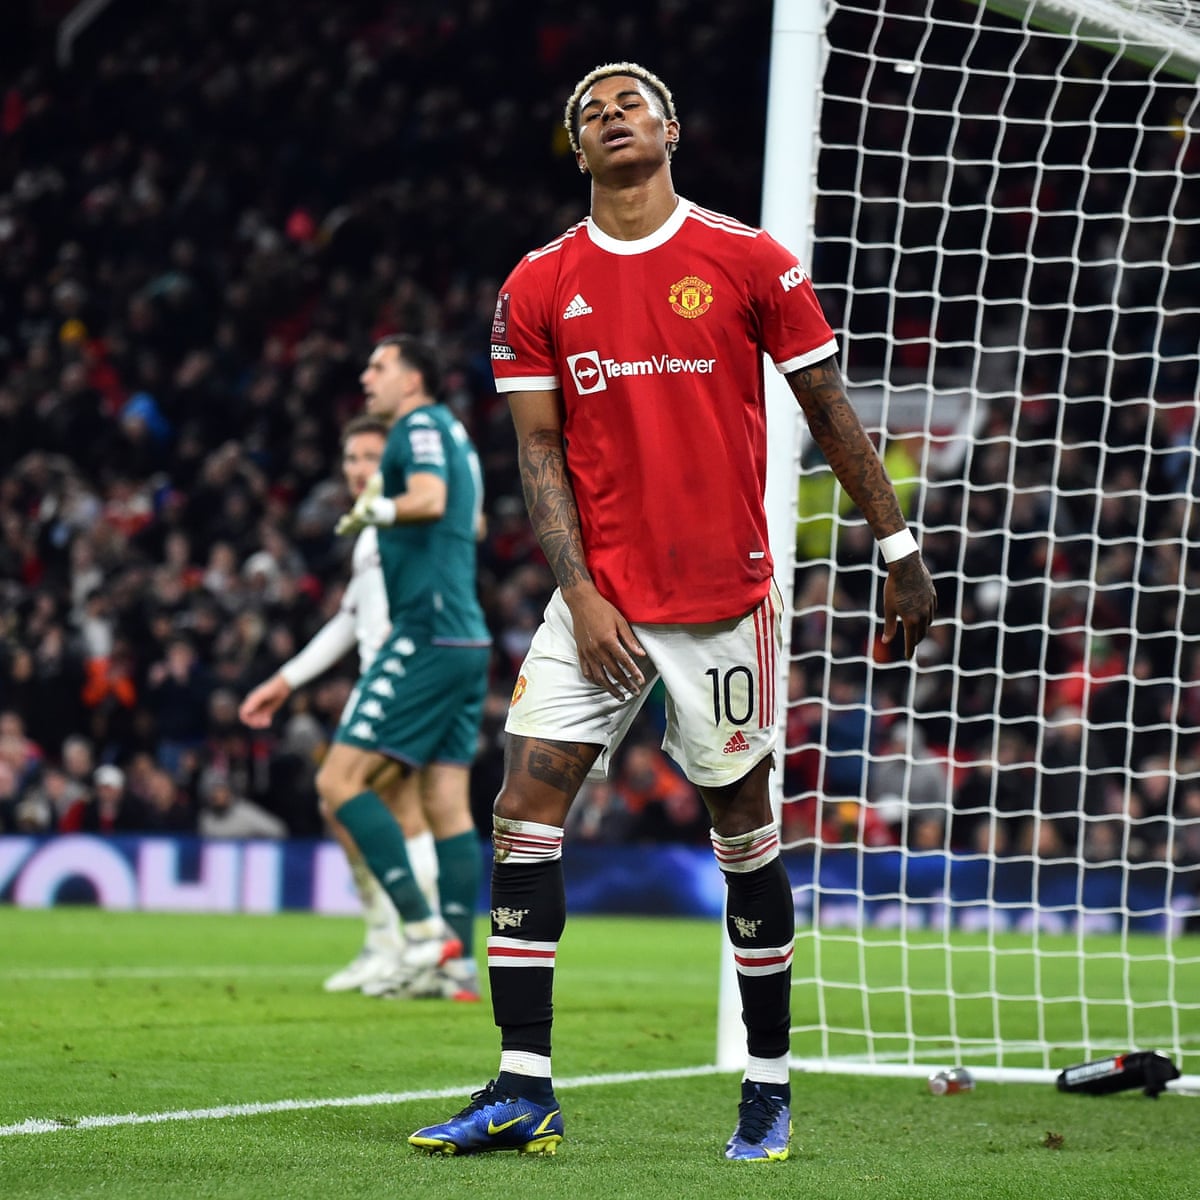 Marcus Rashford looks out of form and cheer at Manchester United